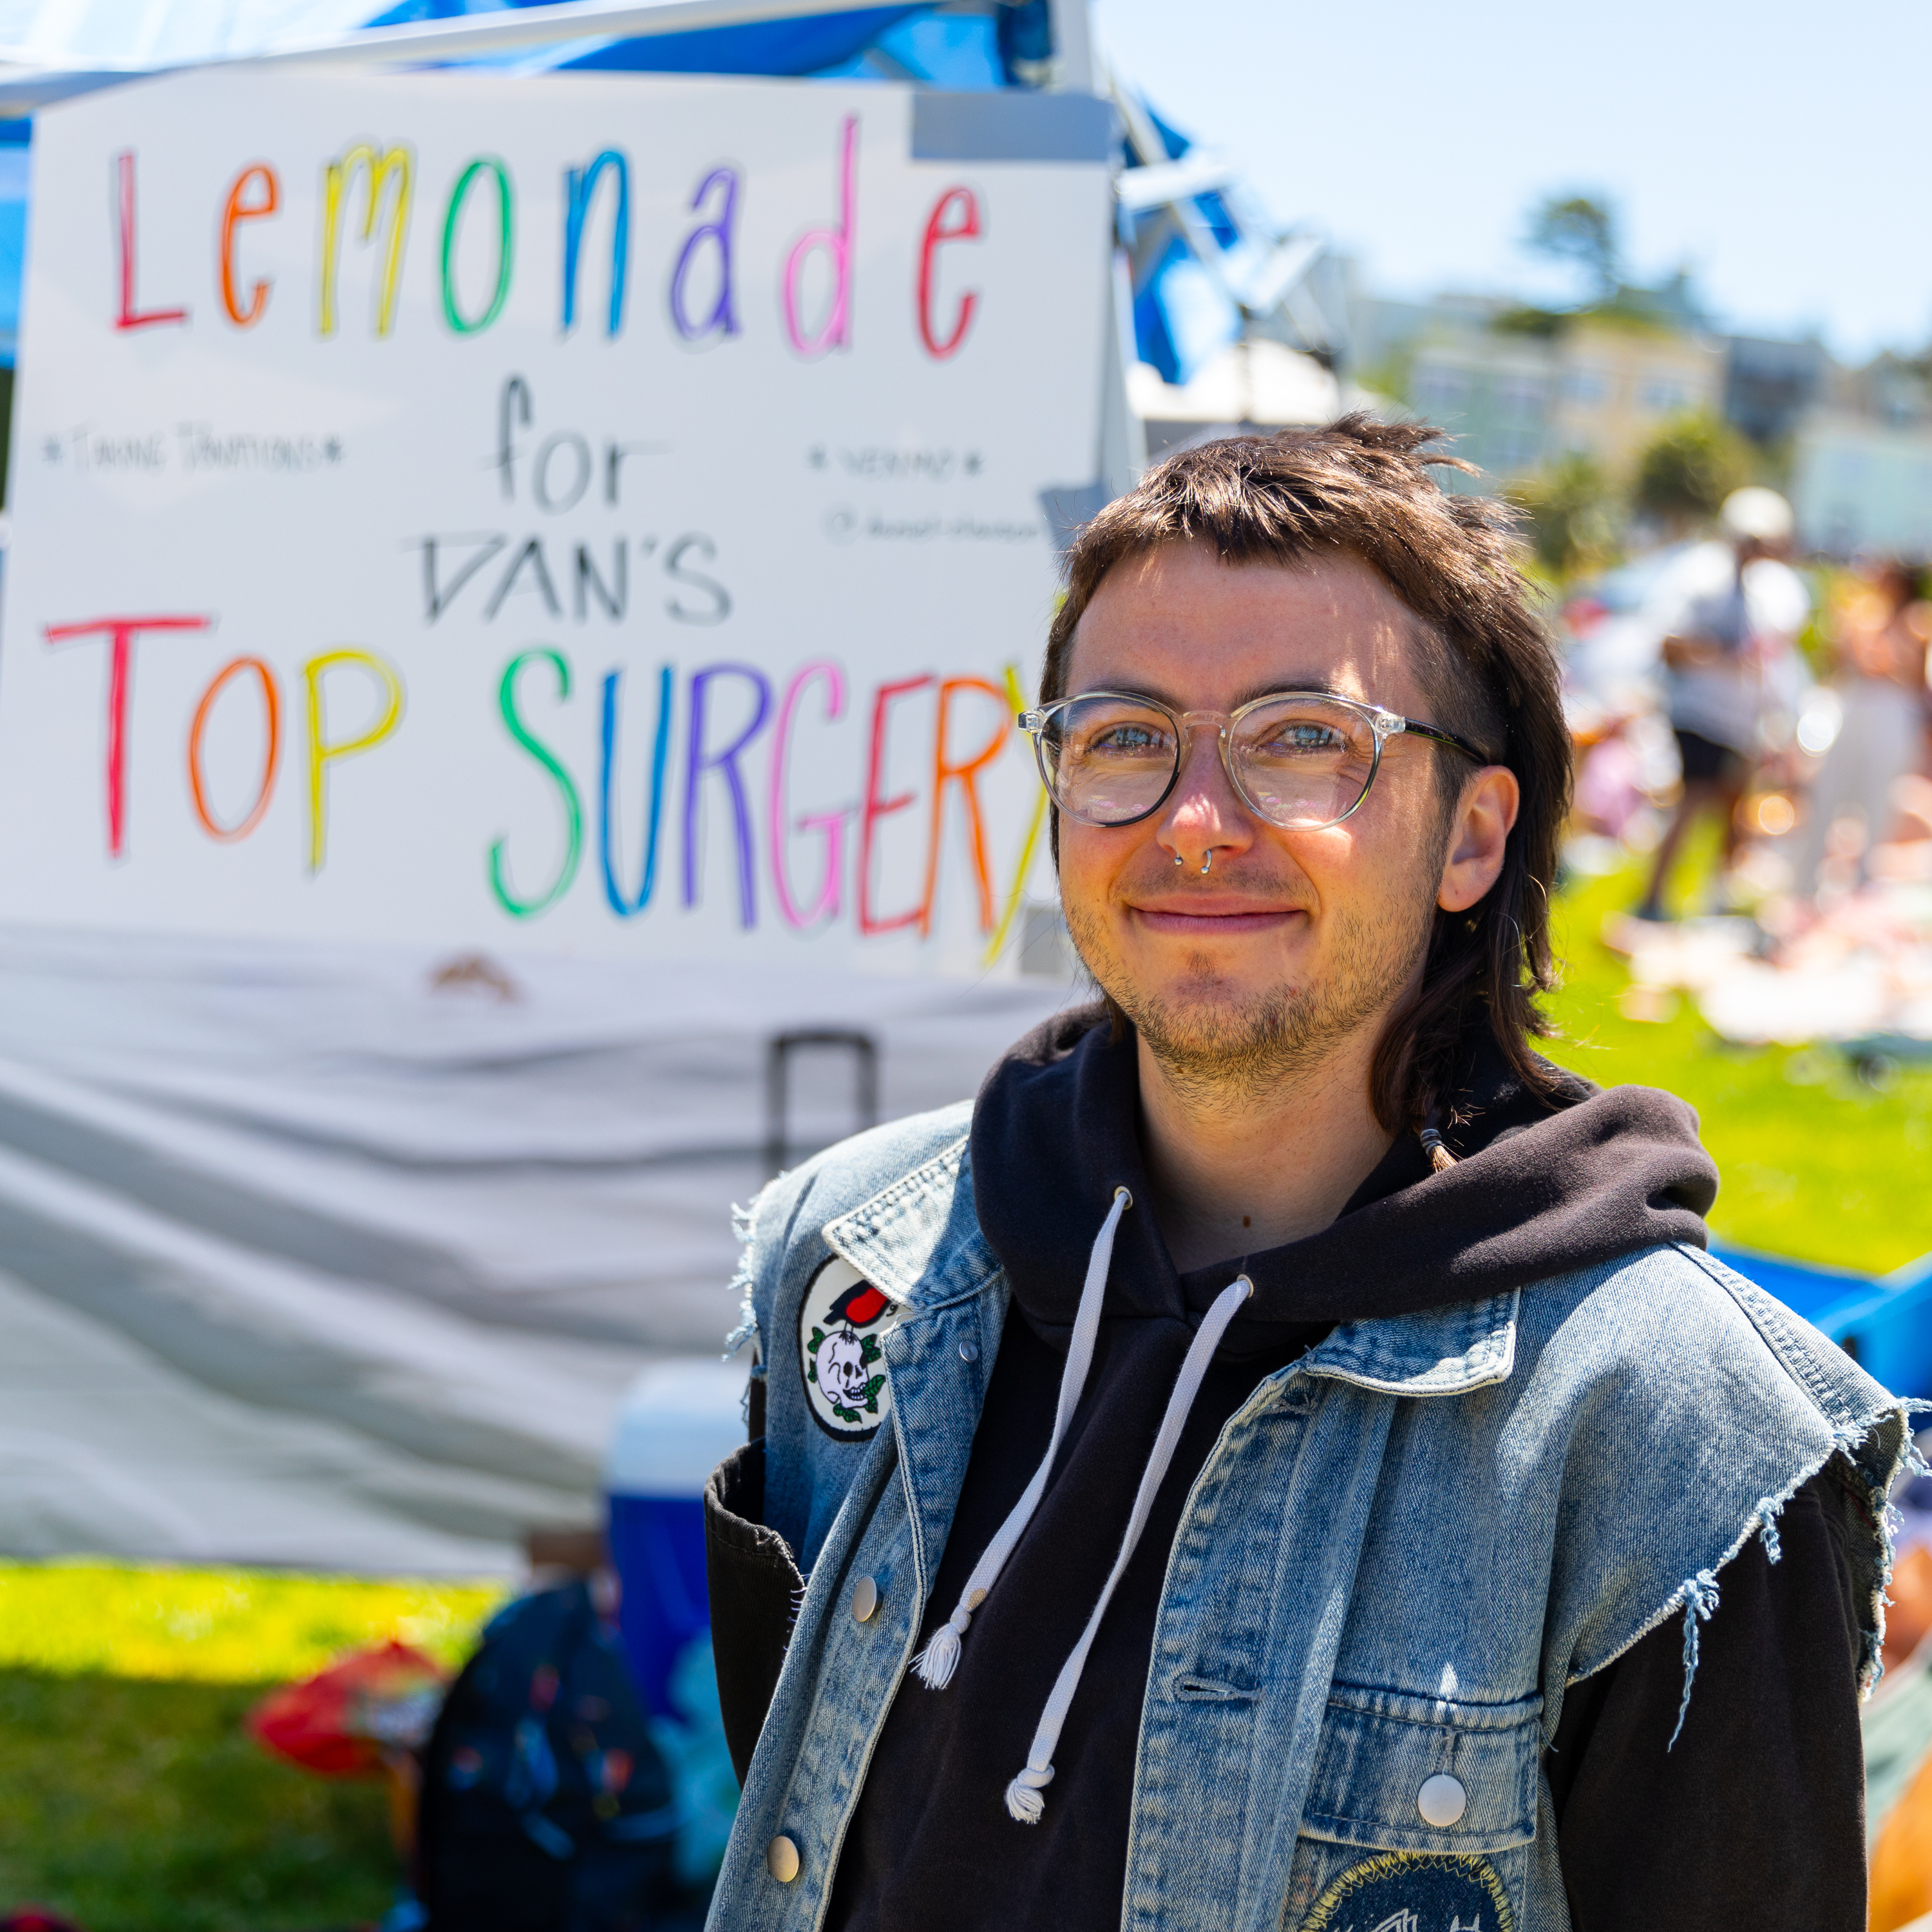 A smiling person with glasses and a denim jacket stands outdoors. Behind them, a sign reads &quot;Lemonade for Van's Top Surgery&quot; in colorful letters.